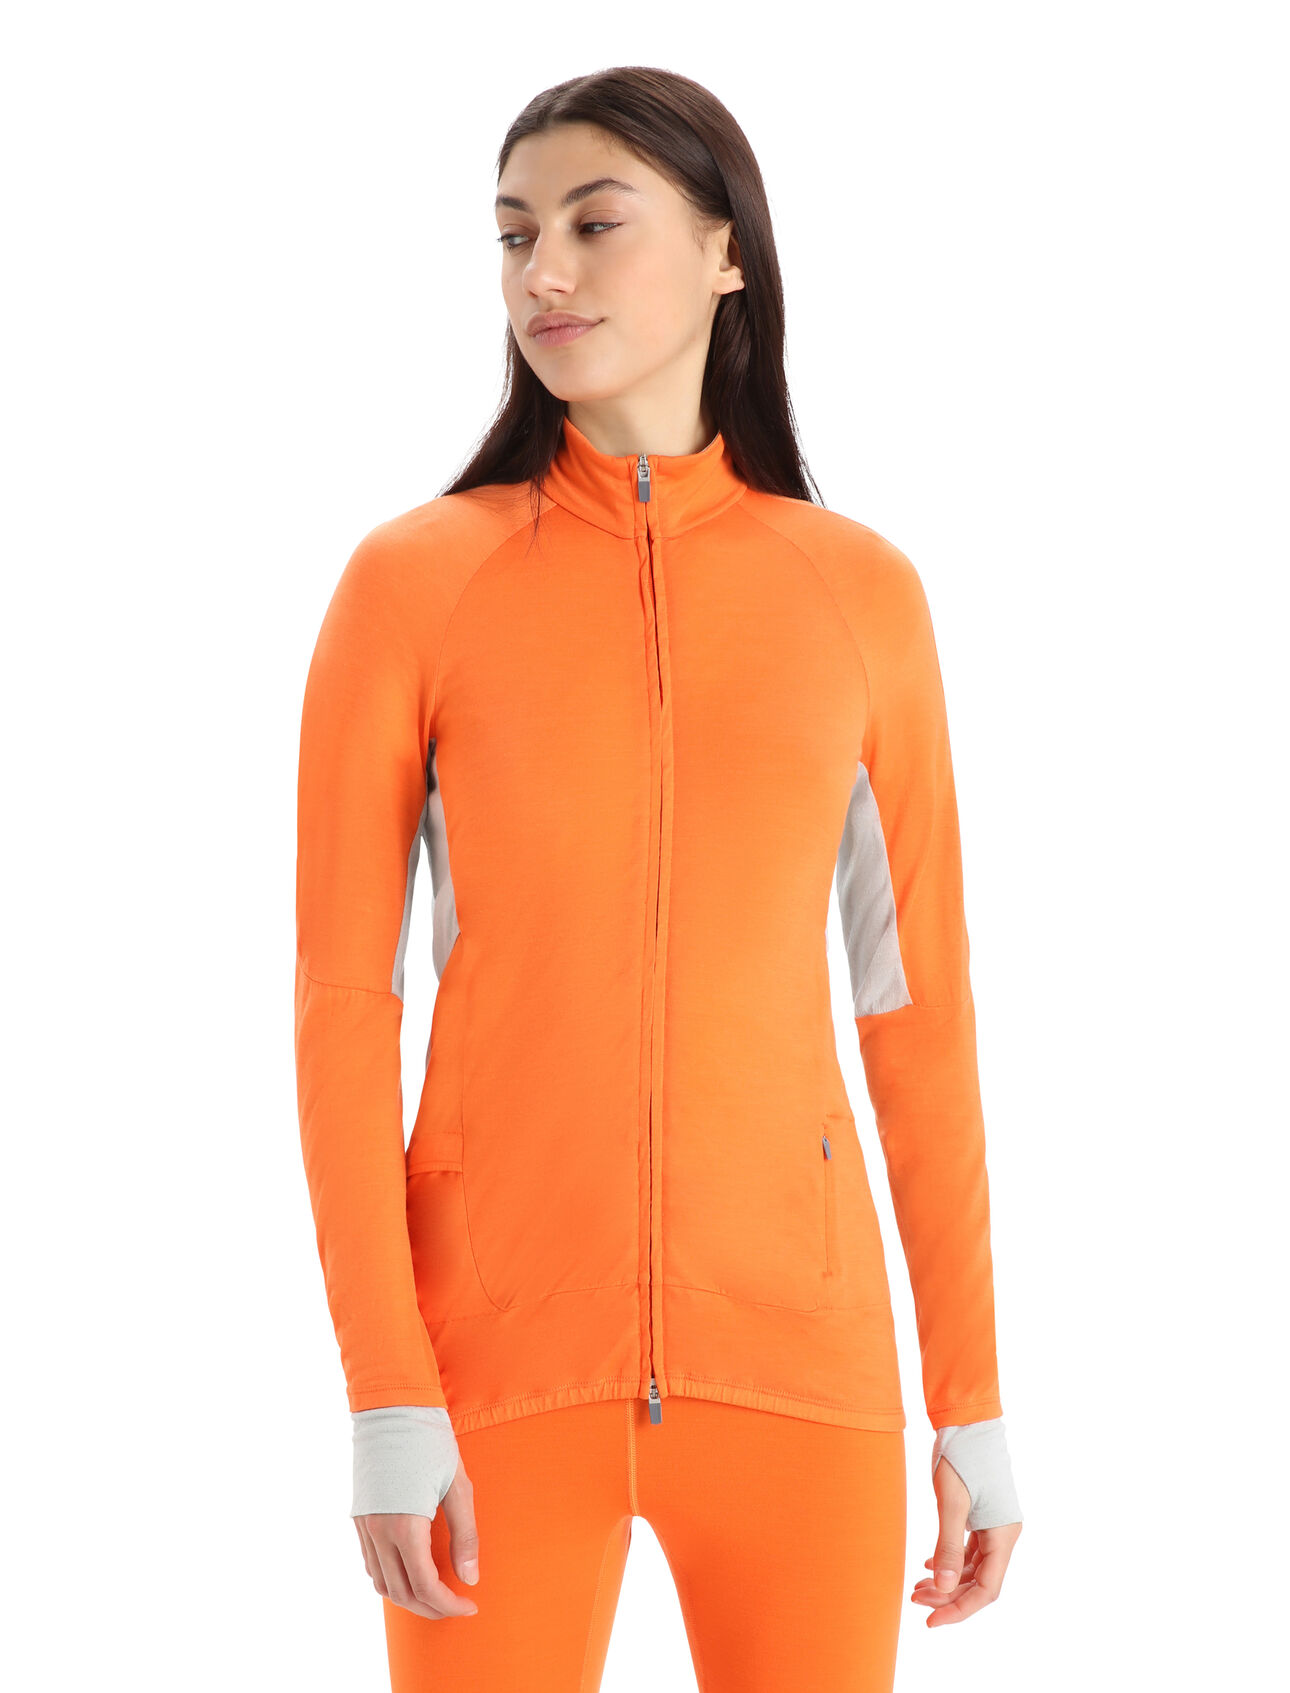 Womens ZoneKnit™ Merino Long Sleeve Zip Jacket A lightweight midlayer designed to balance warmth and breathability while running, biking or moving fast in the mountains, the ZoneKnit™ Long Sleeve Zip combines our Cool-Lite™ jersey fabric with strategic panels of eyelet mesh for enhanced airflow.